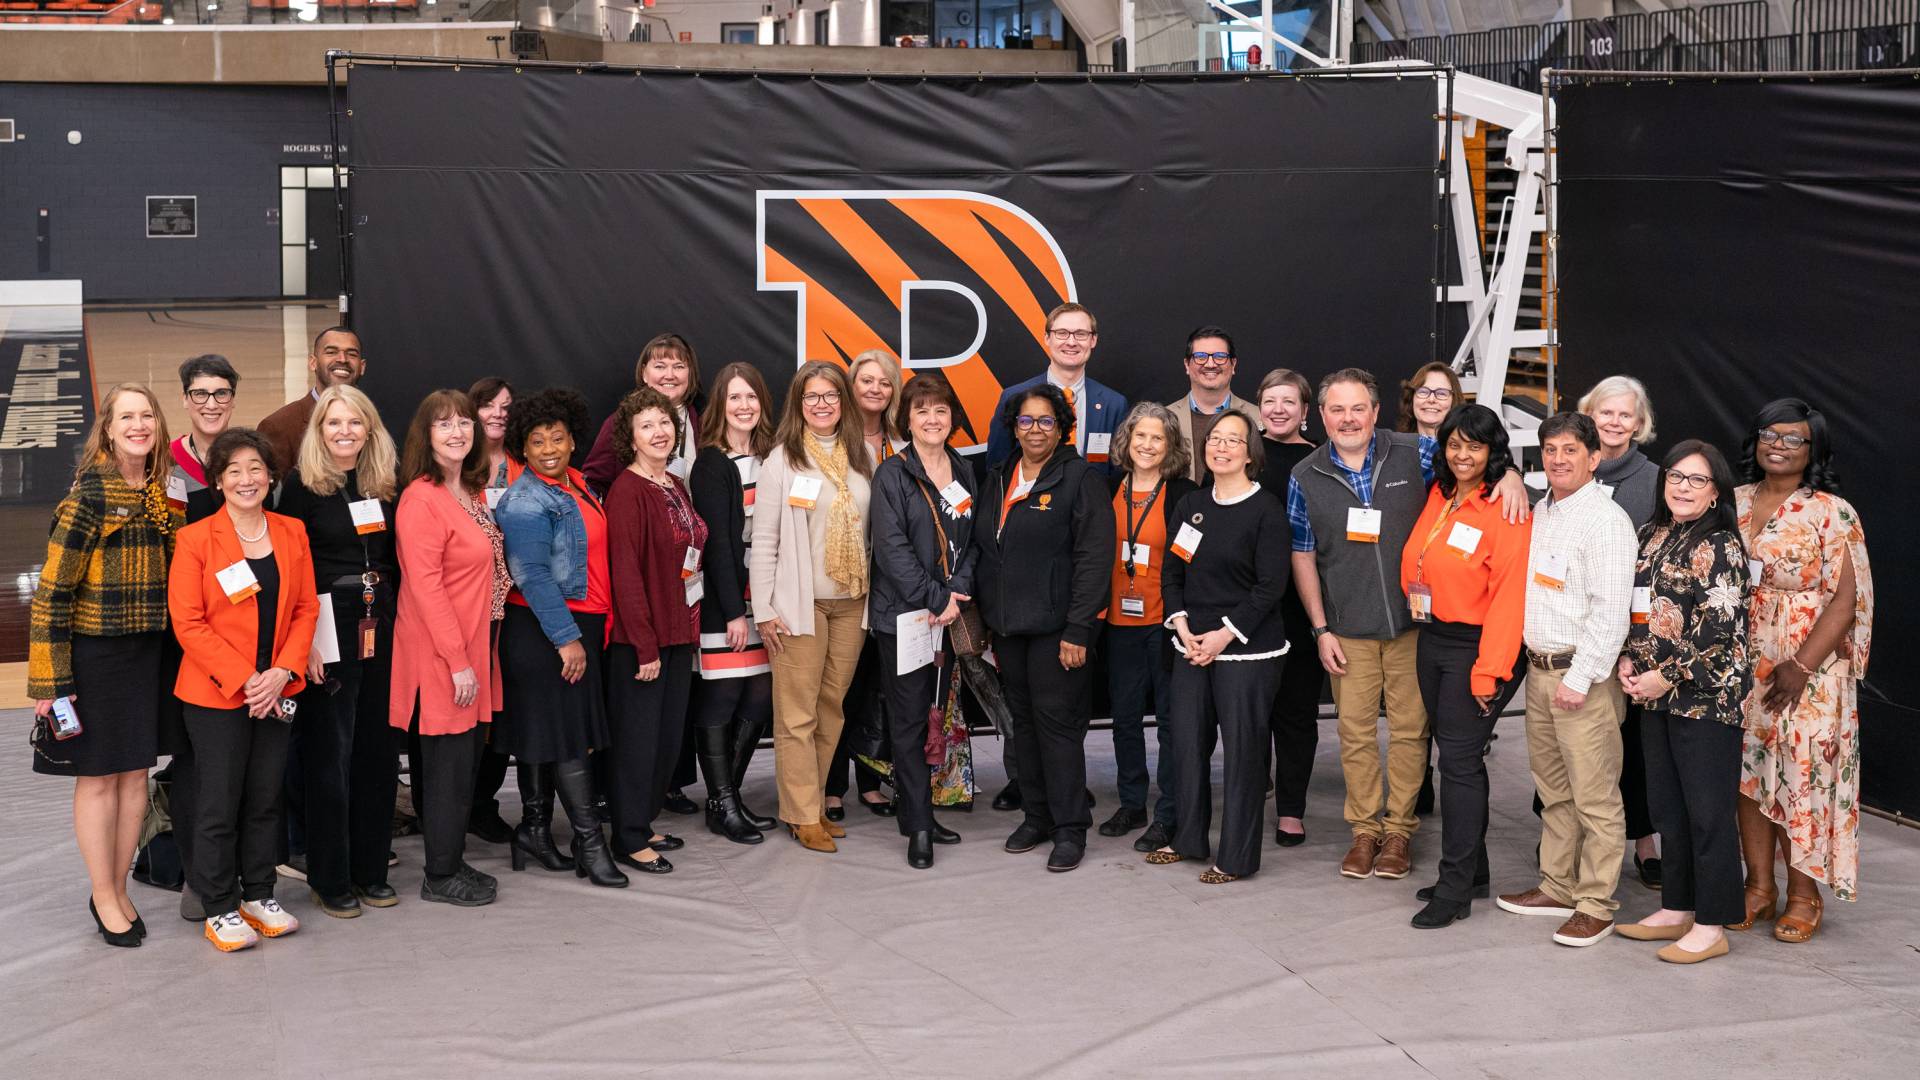 Advancement group poses in front of tiger stripe P banner